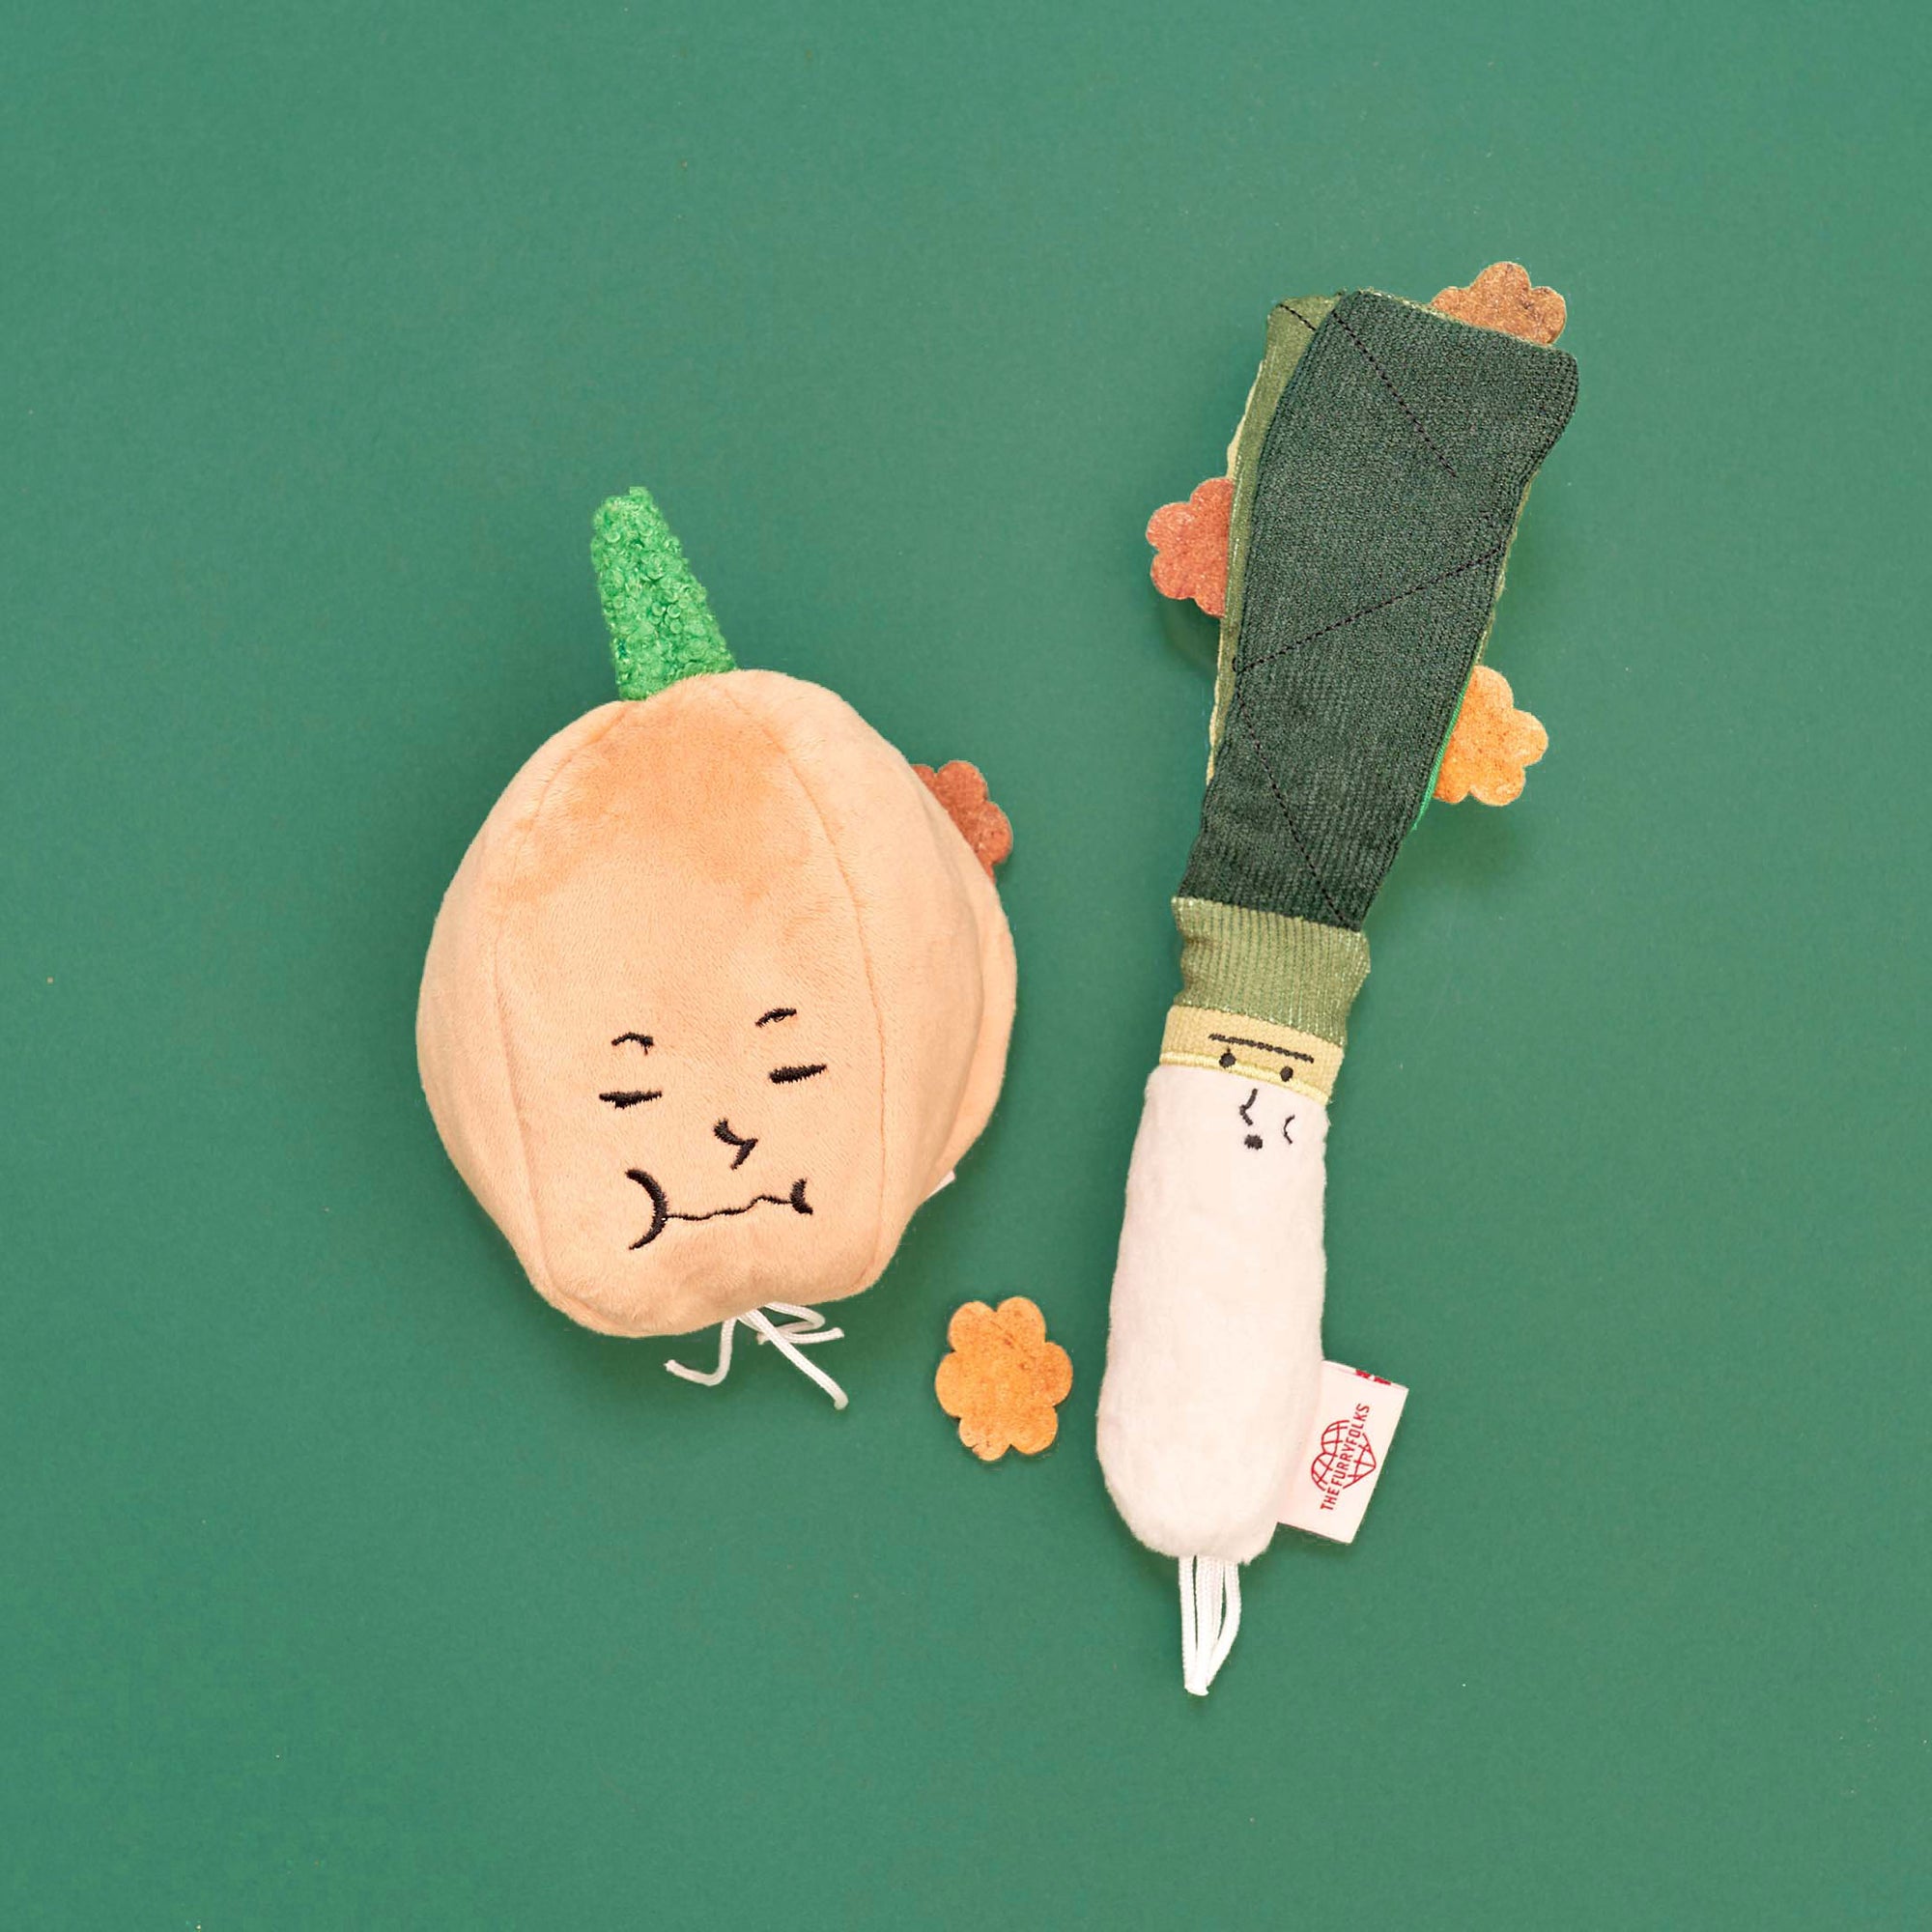 The image features two plush dog toys, one shaped like a yellow onion with a happy face and green top, and another resembling a green onion with a content face and dark green leaves. Both are laid out on a green background with a few dog treats scattered around, indicating their function as interactive nosework toys that can be stuffed with treats to encourage a dog’s natural foraging behavior. The setup is simple yet visually engaging, highlighting the toys' features and potential for pet entertainment.